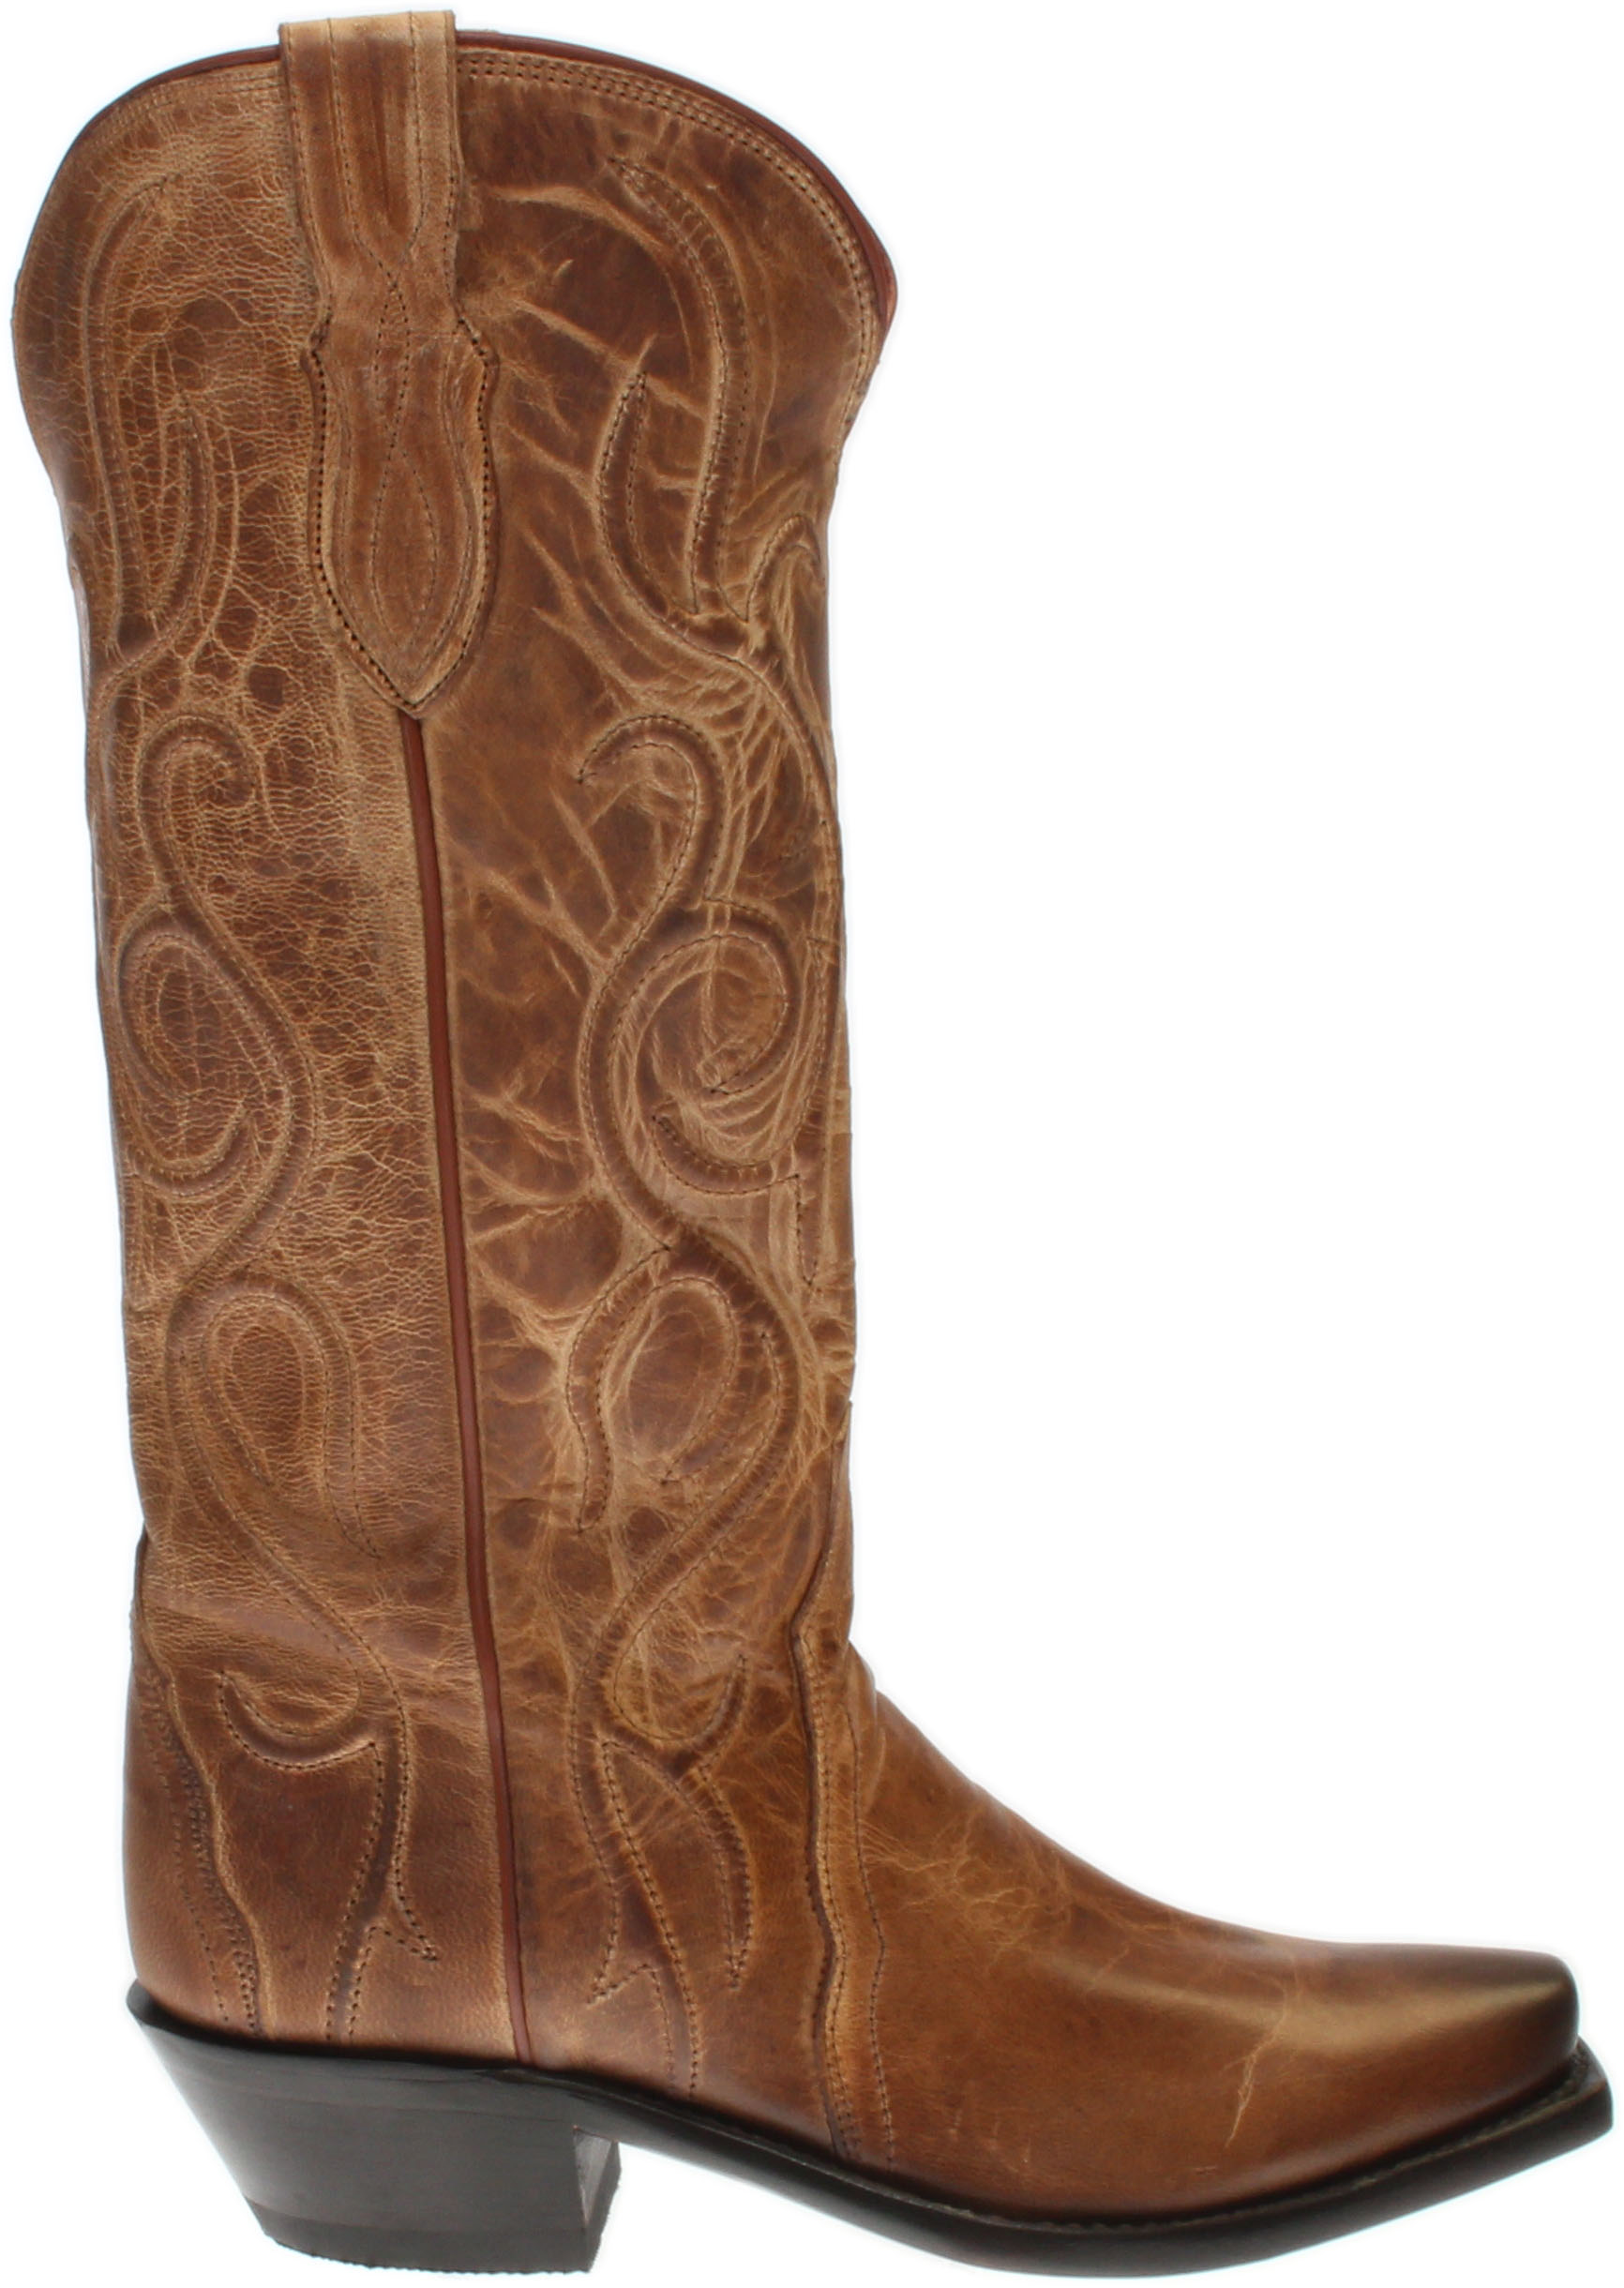 Lucchese Patsy Mad Dog Goat Leather Boots